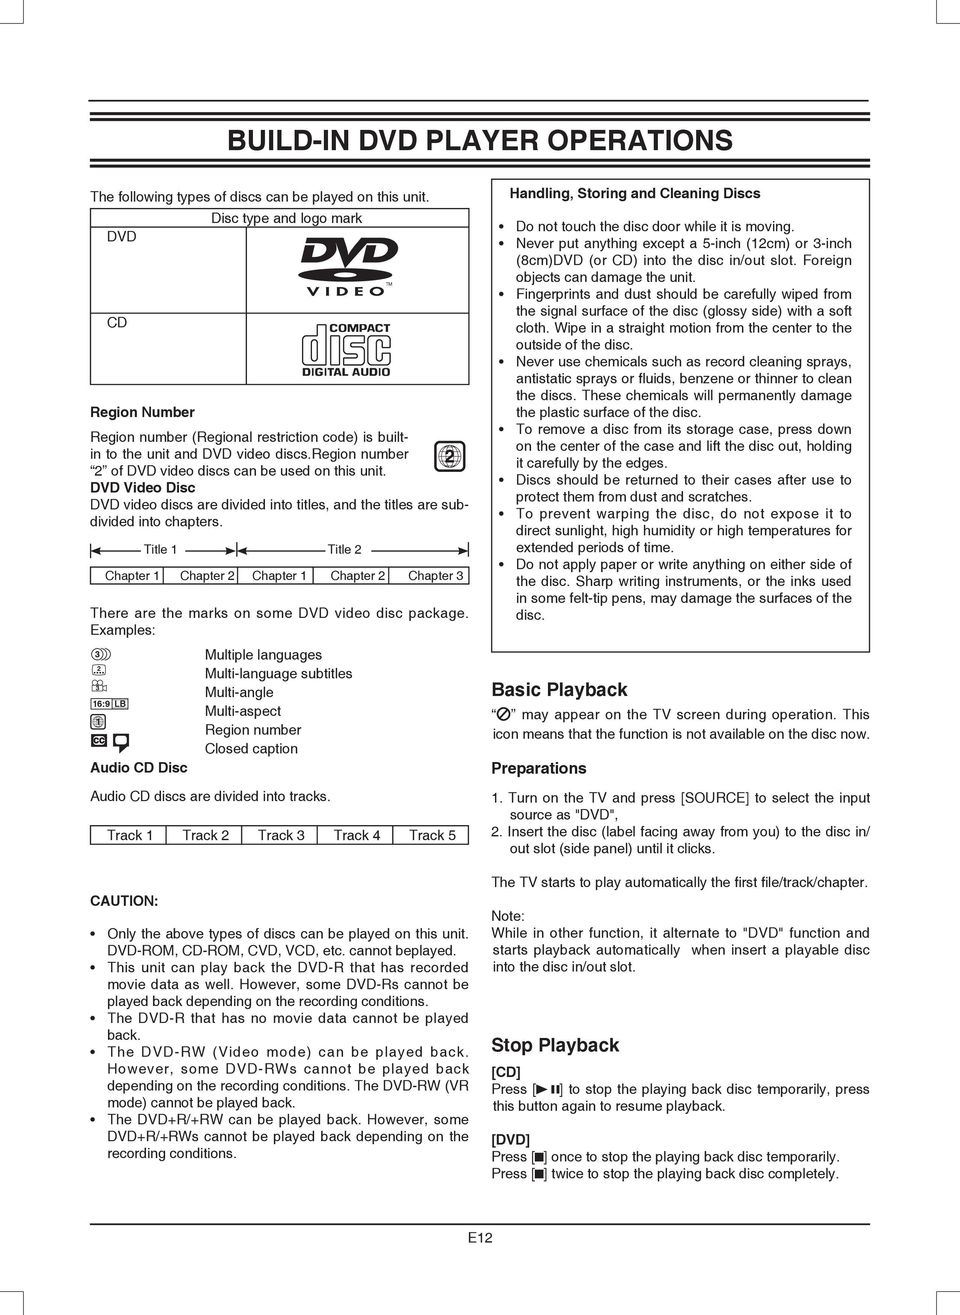 DVD Video Disc DVD video discs are divided into titles, and the titles are subdivided into chapters.